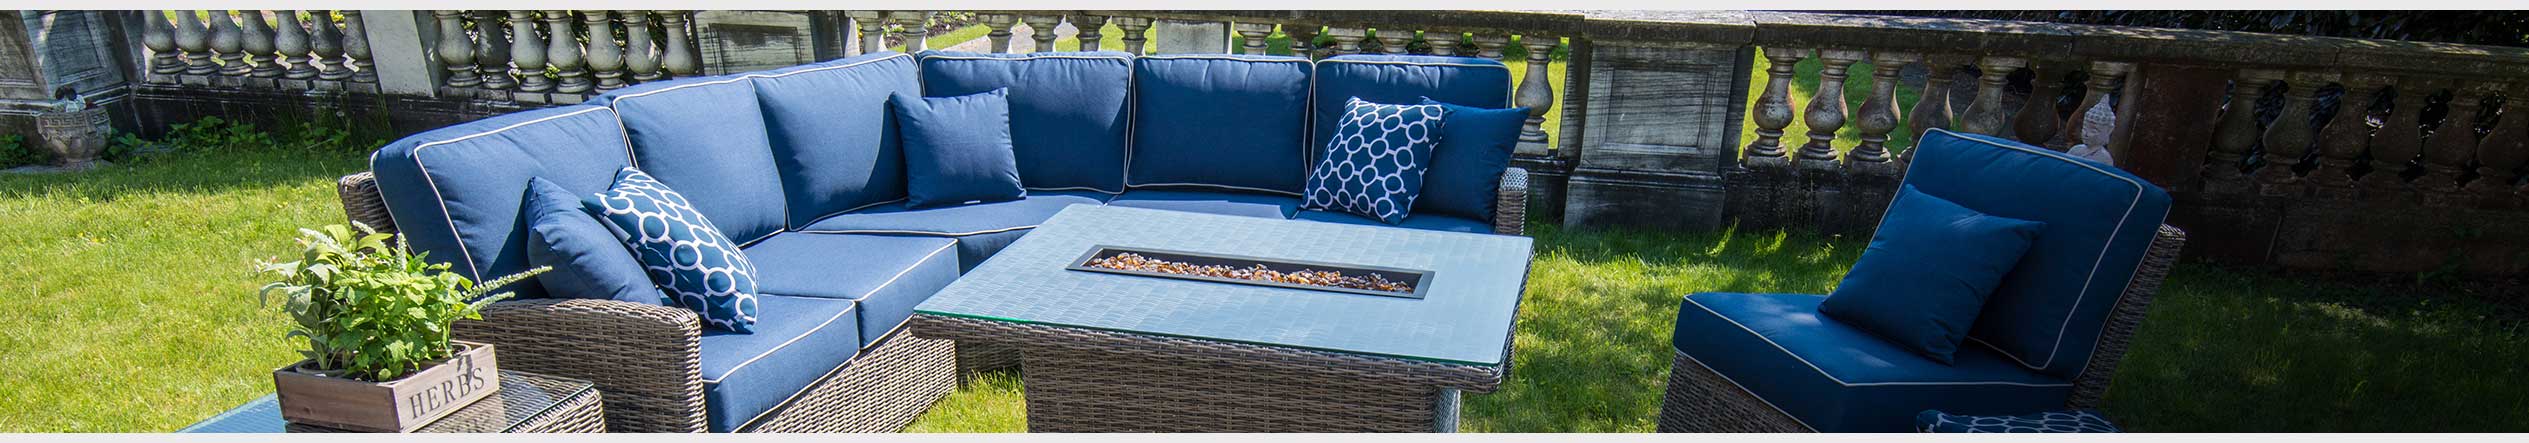 Outdoor Patio & Deck furniture for sale at Jordan's Furniture stores in MA, NH and RI